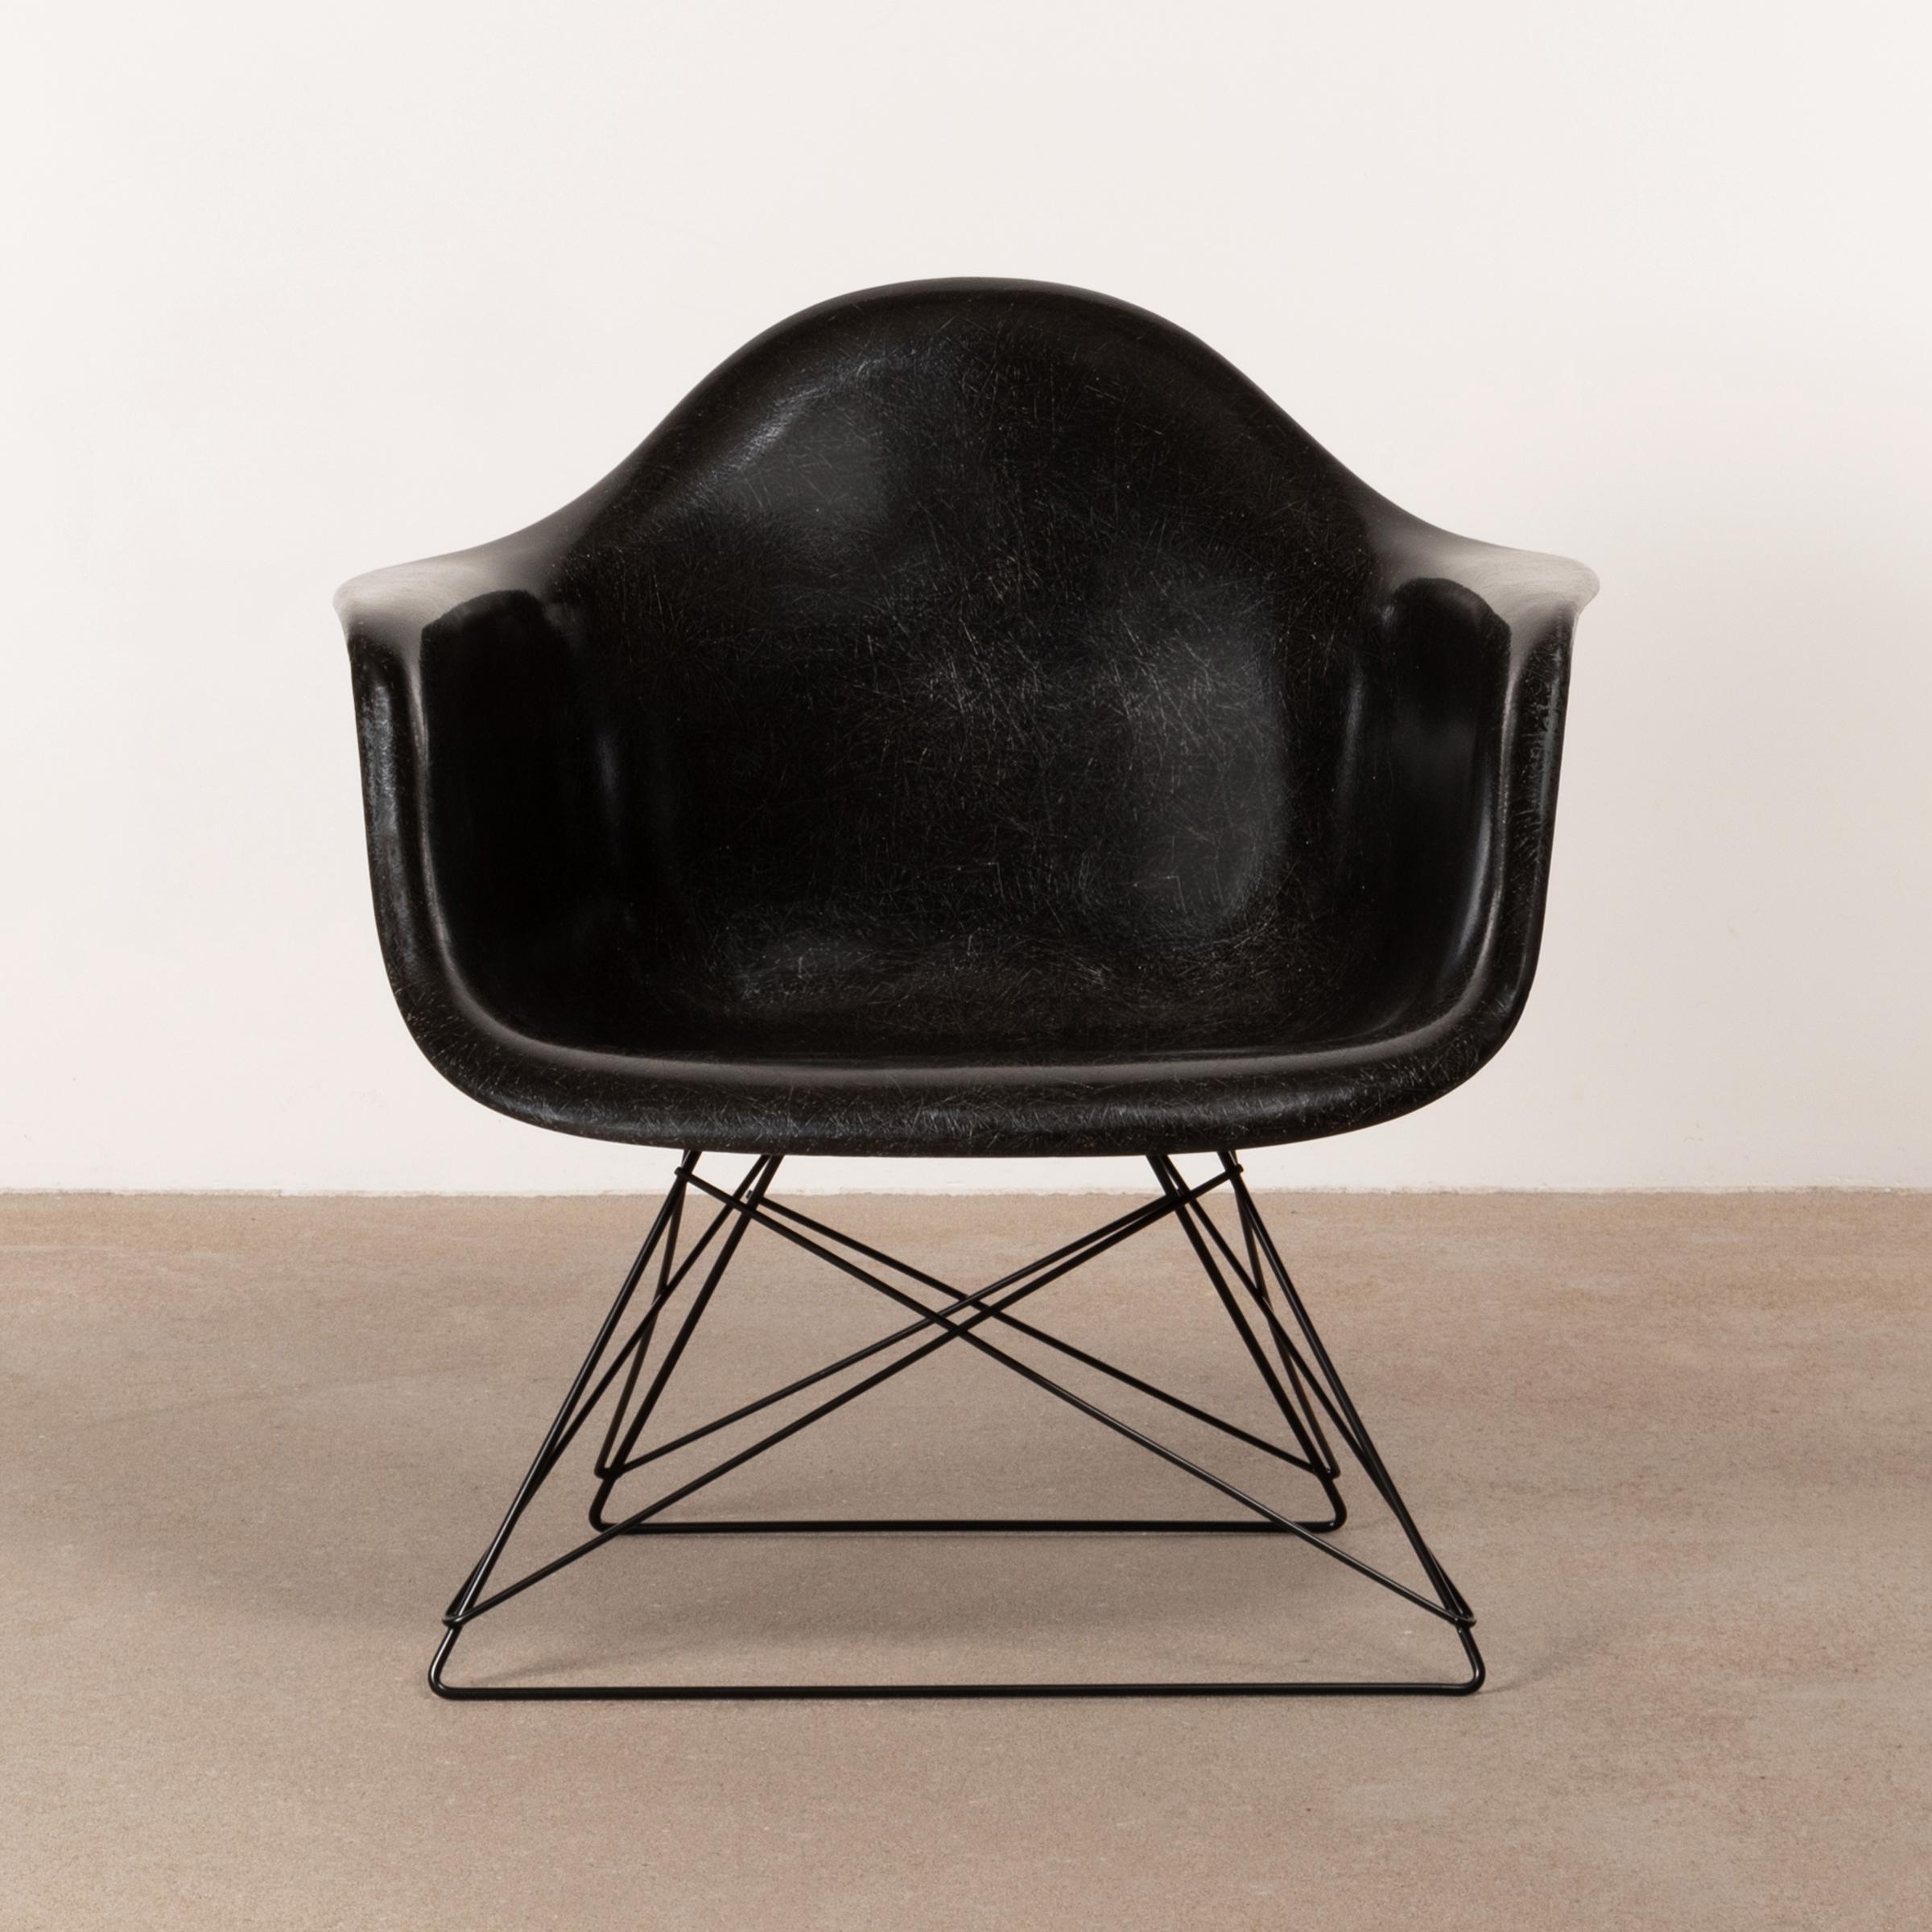 Late 1960s LAR (low-rod) lounge armchair designed by Charles and Ray Eames for Herman Miller. Black fiberglass arm shell signed with embossed HM / factory logo in very good condition with newer base.